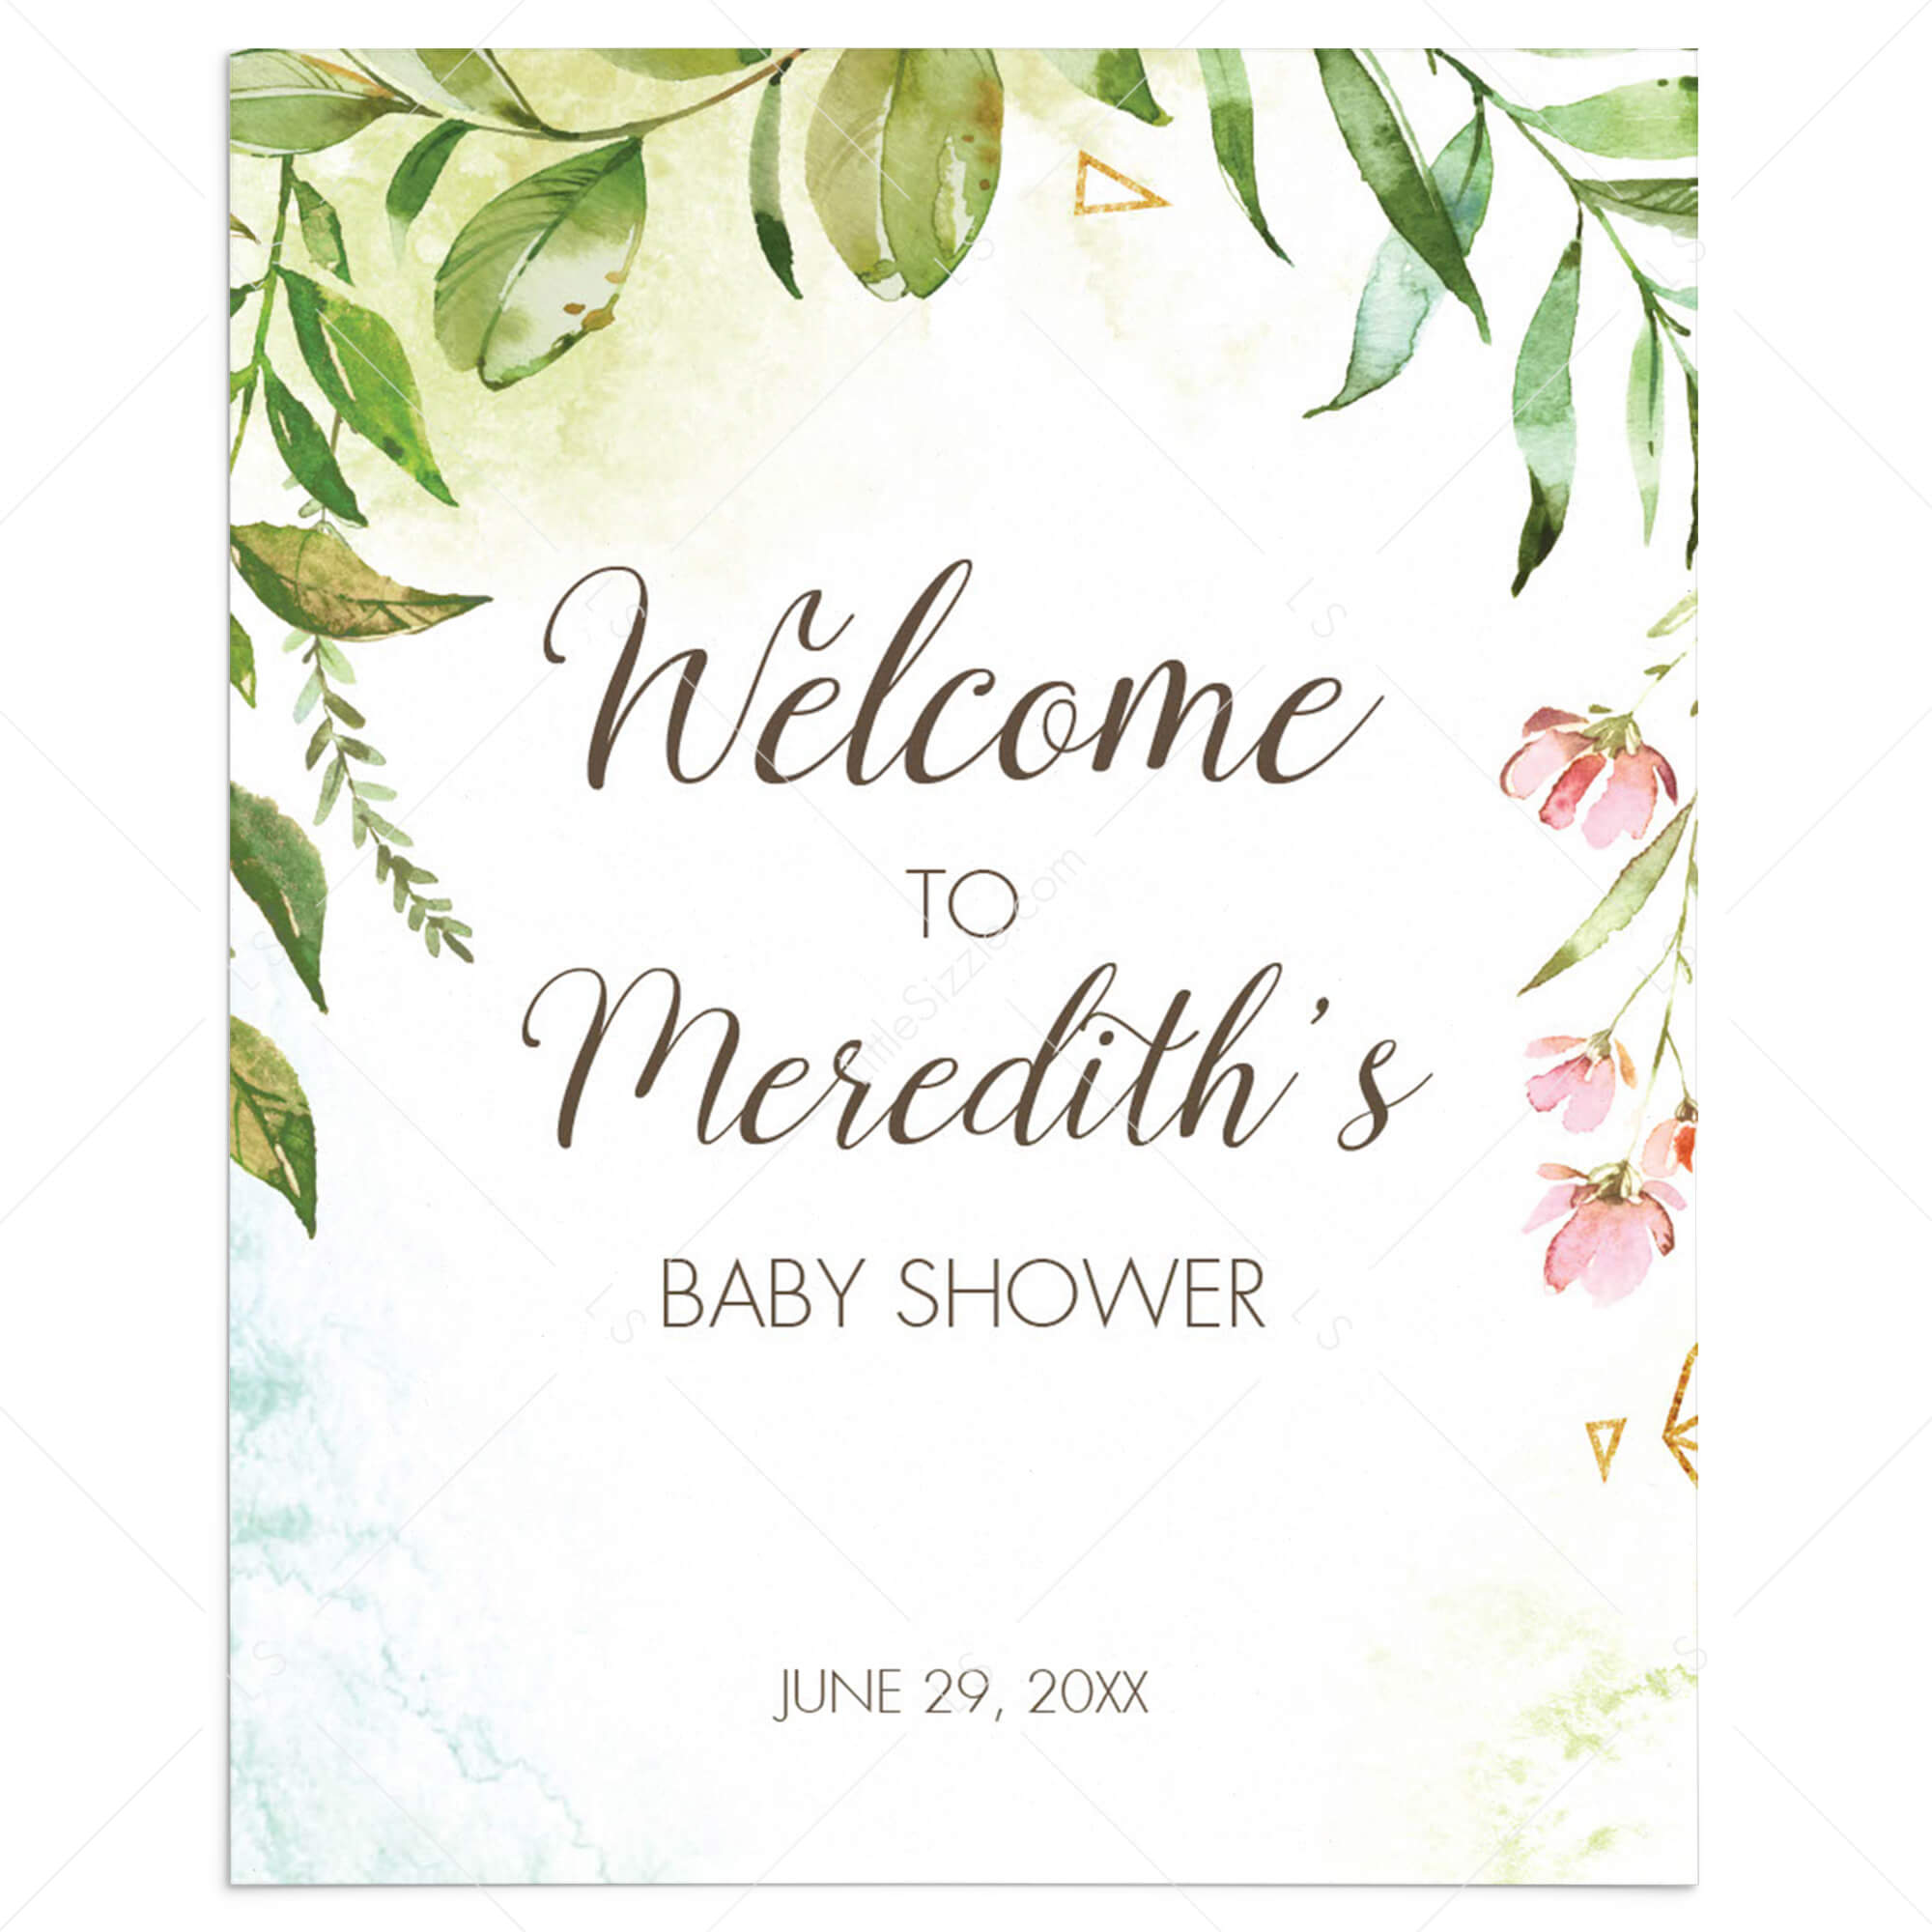 Garden Themed Baby Shower Welcome Sign Template by LittleSizzle